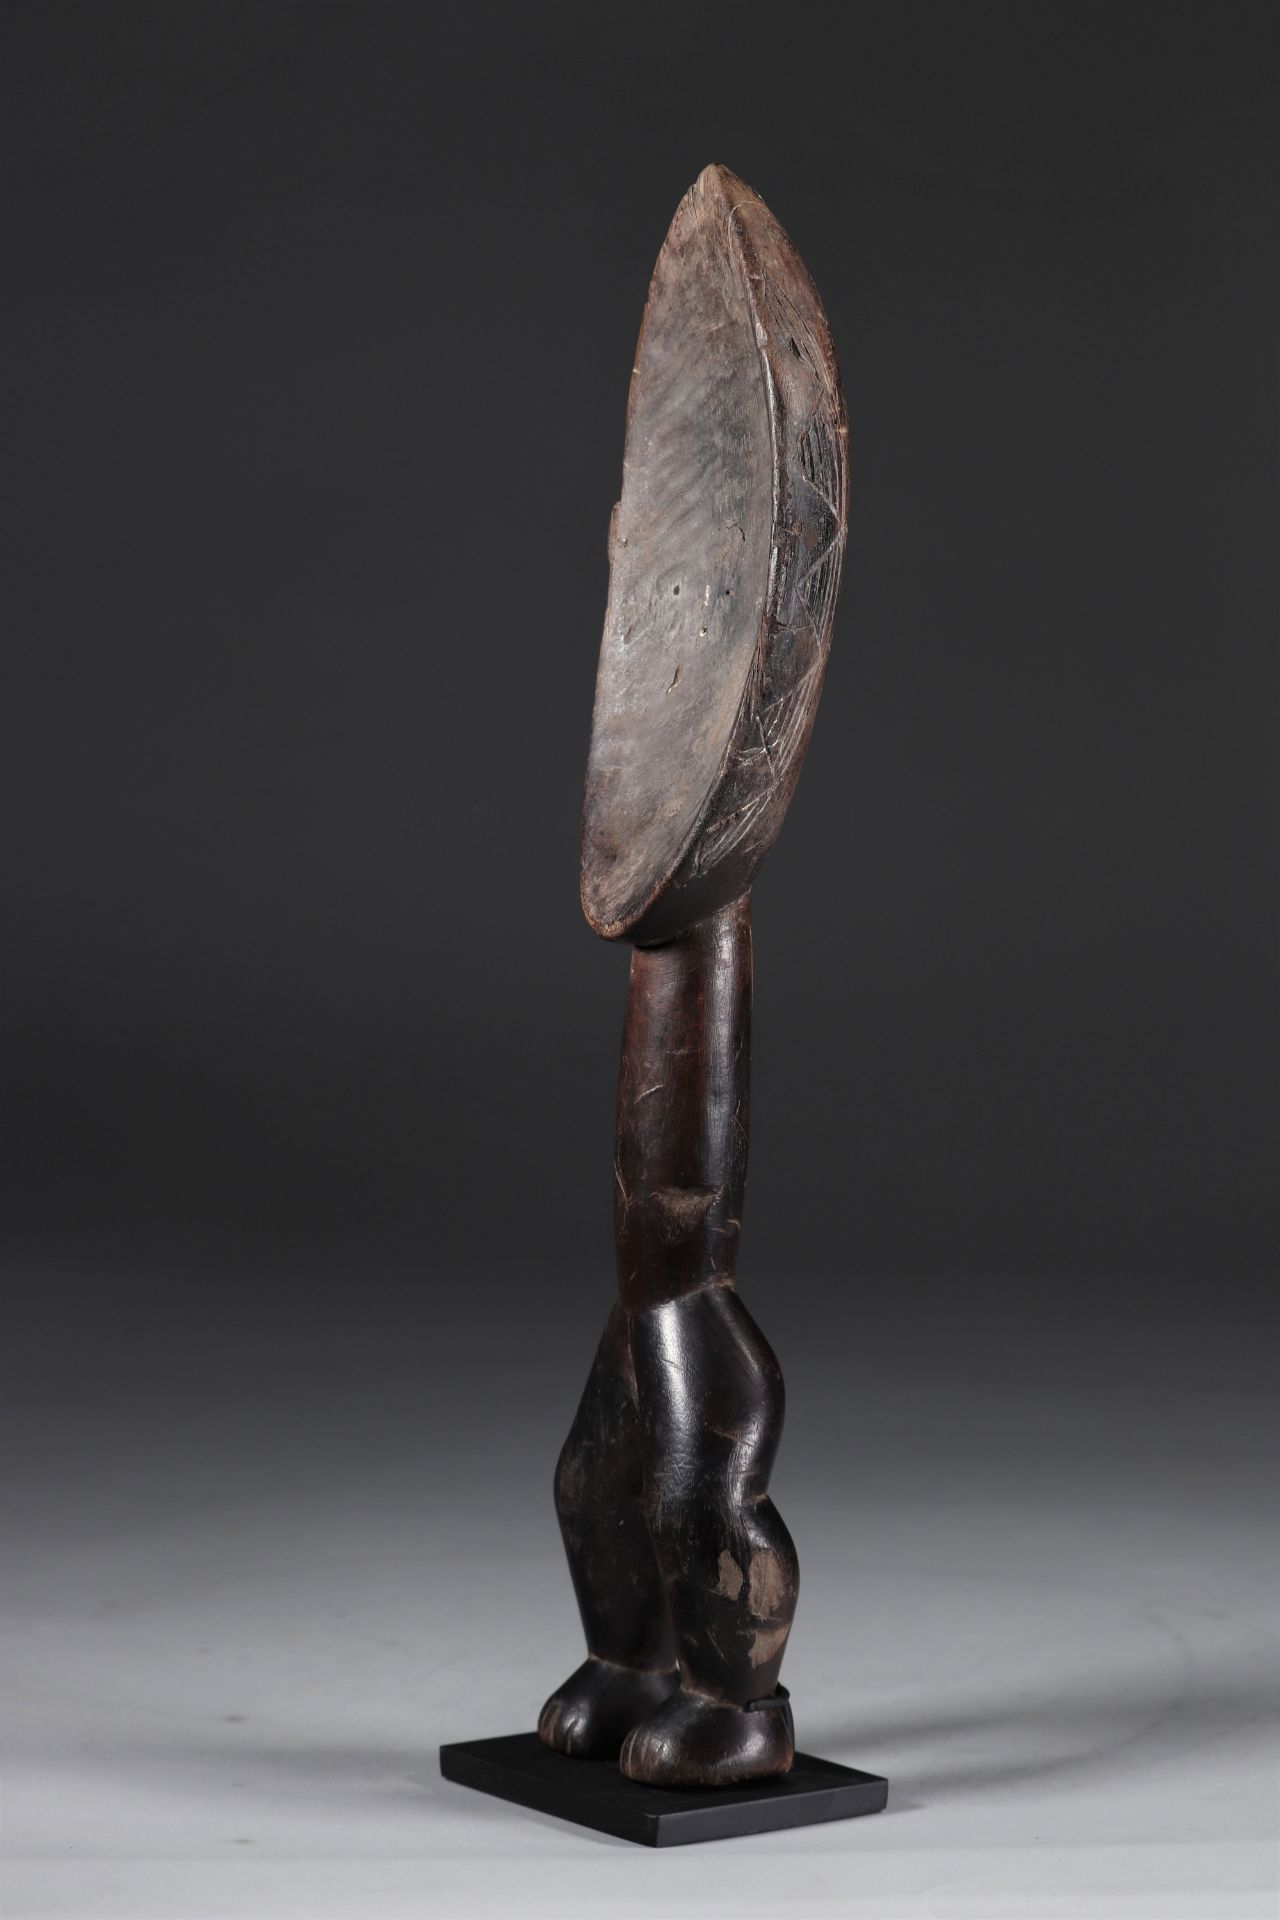 Ceremonial spoon Dan early 20th century beautiful patina - private collection Belgium - Image 6 of 6